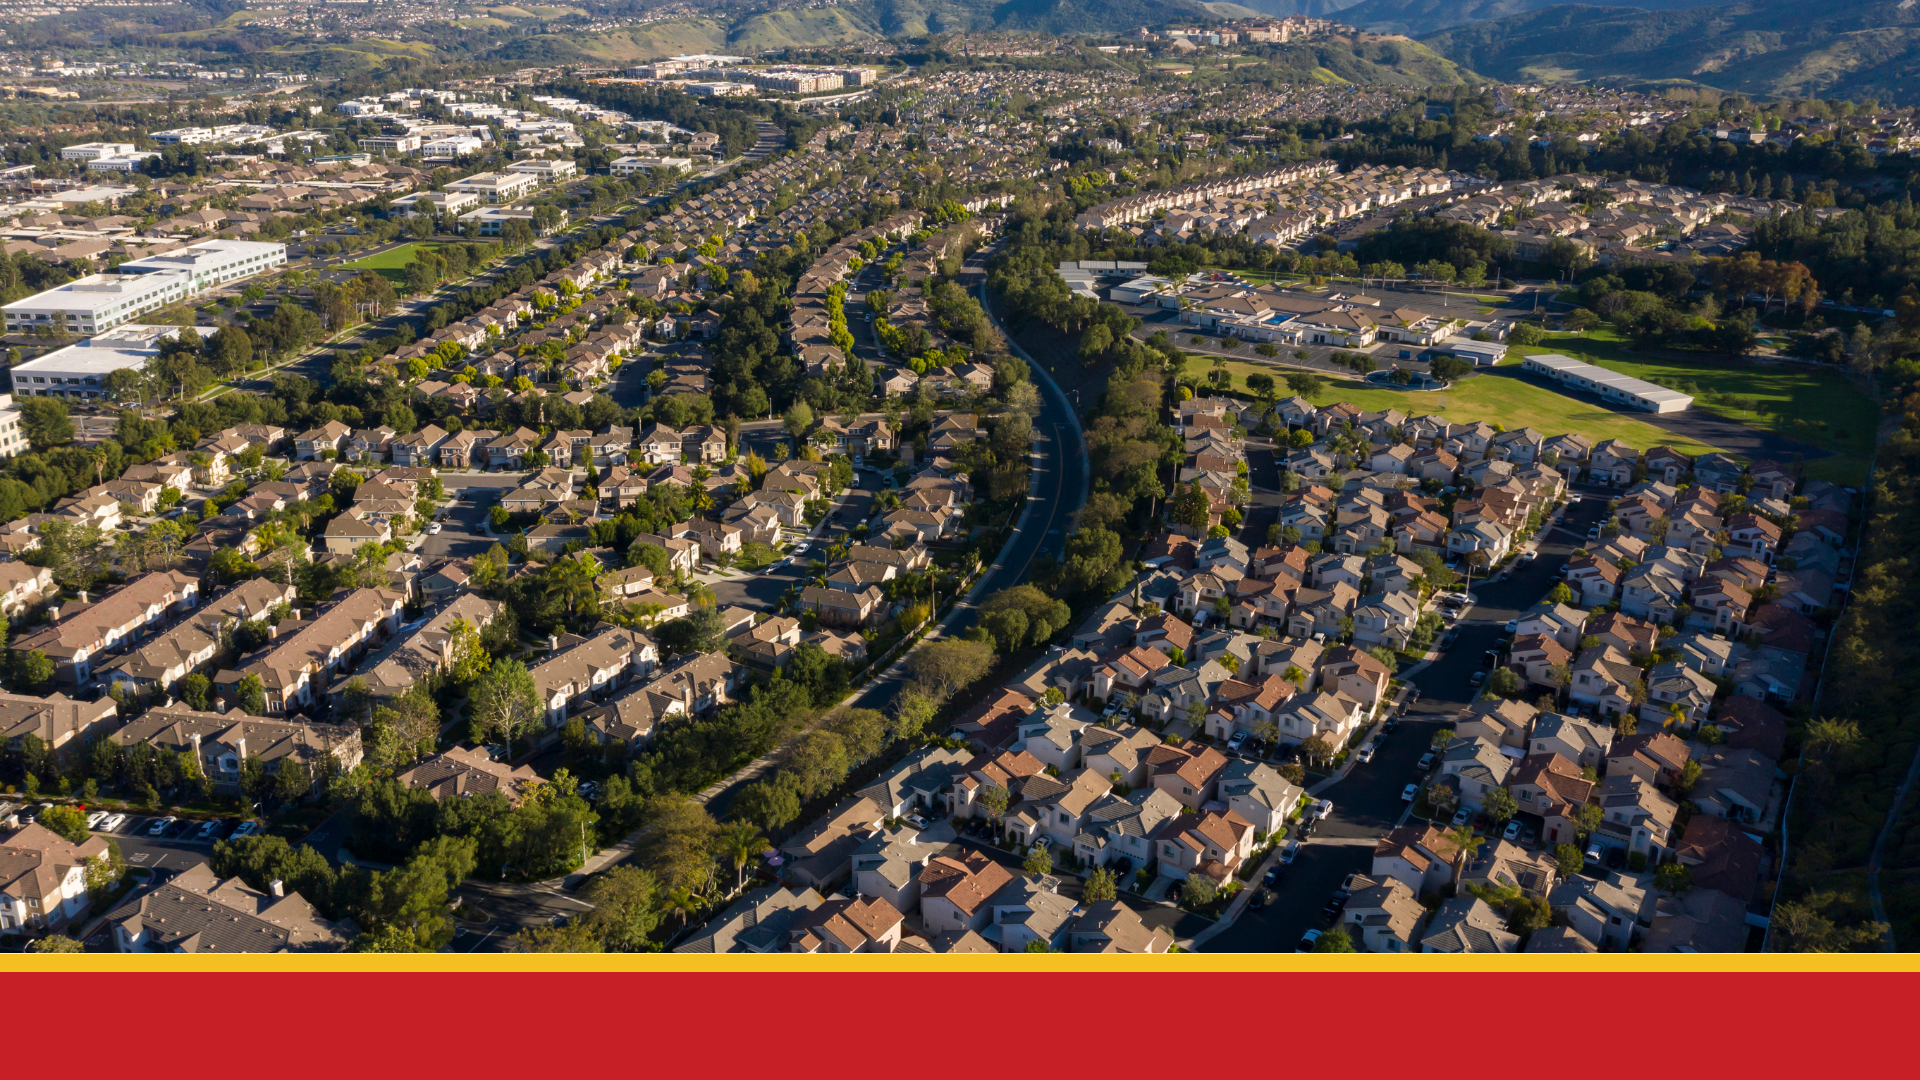 Aerial image of the City of Aliso Viejo